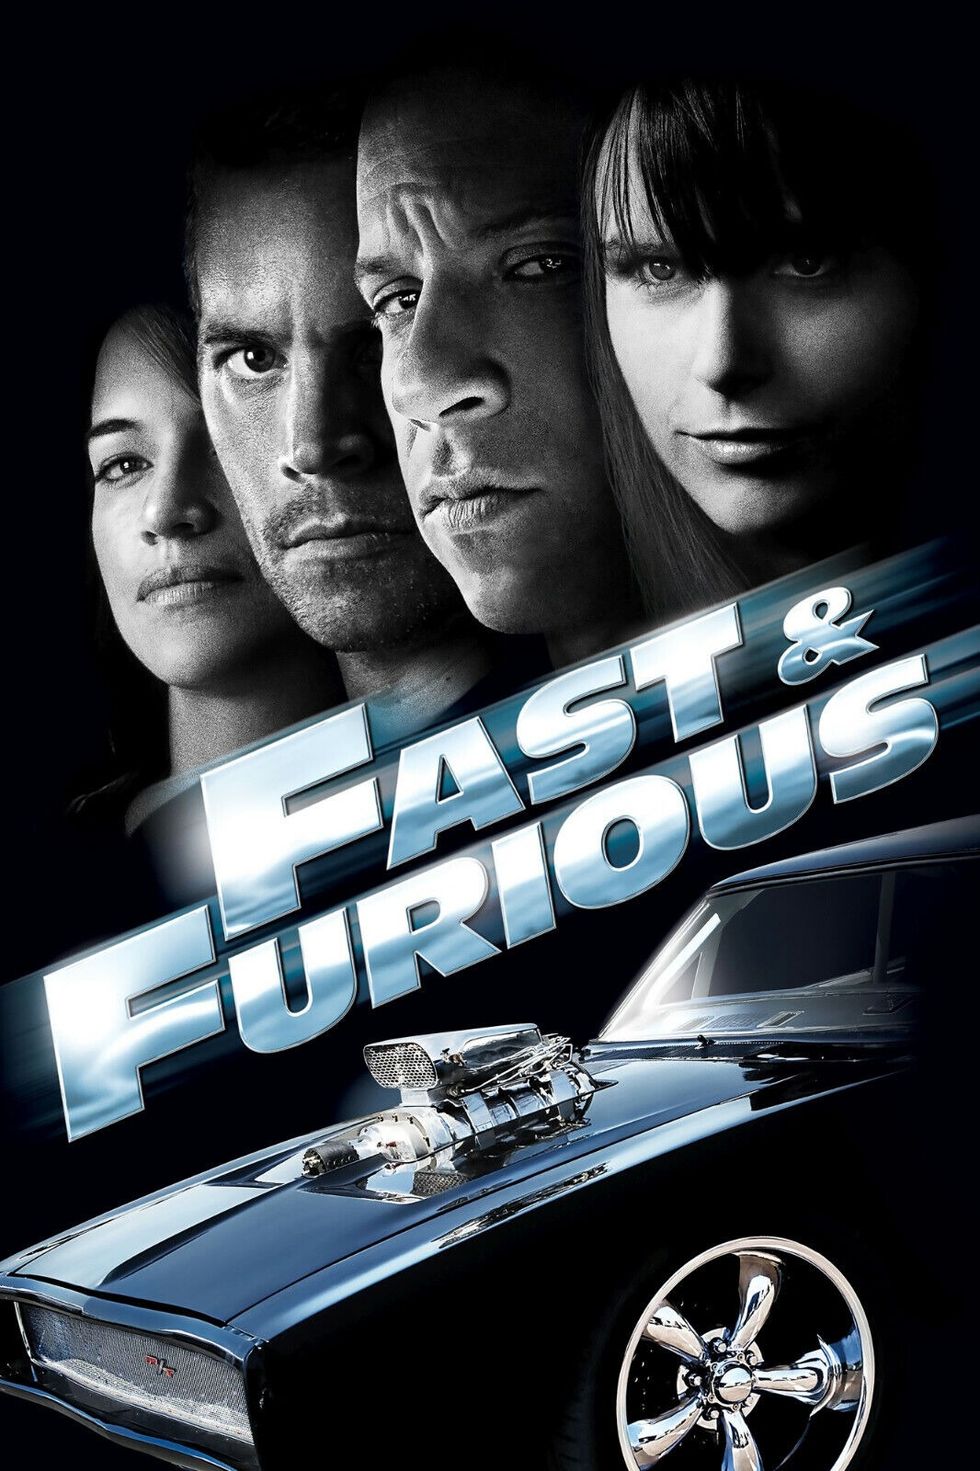  Fast & Furious 1-9 Film Collection [DVD] [2021] : Movies & TV